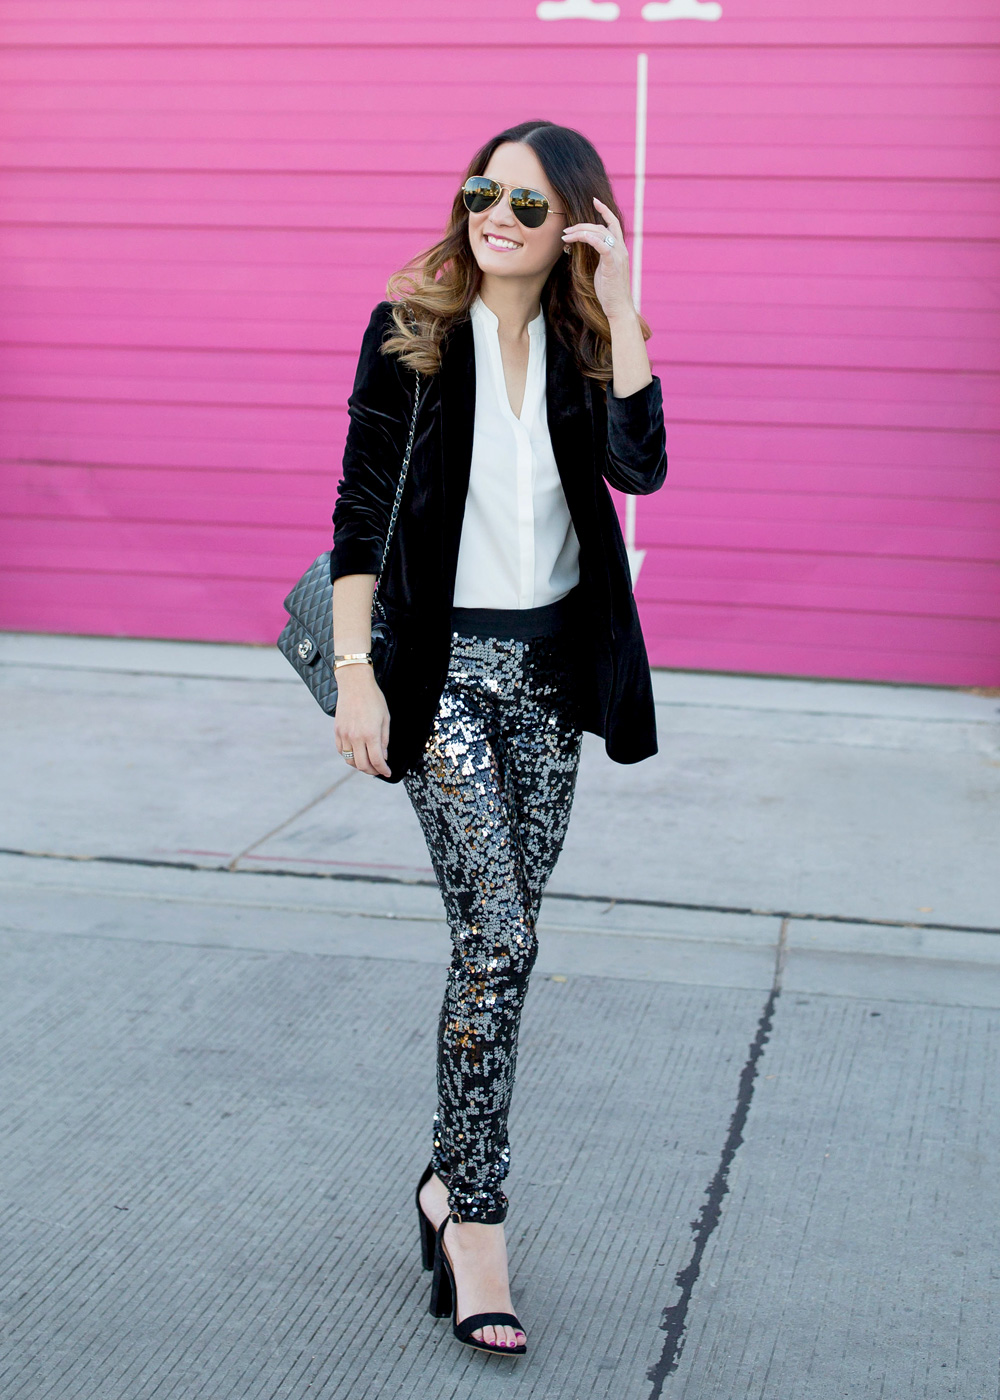 Jennifer Lake Style Charade in Express sequin leggings, black velvet blazer, ivory lace top, and a quilted Chanel flap bag in front of a Chicago pink wall